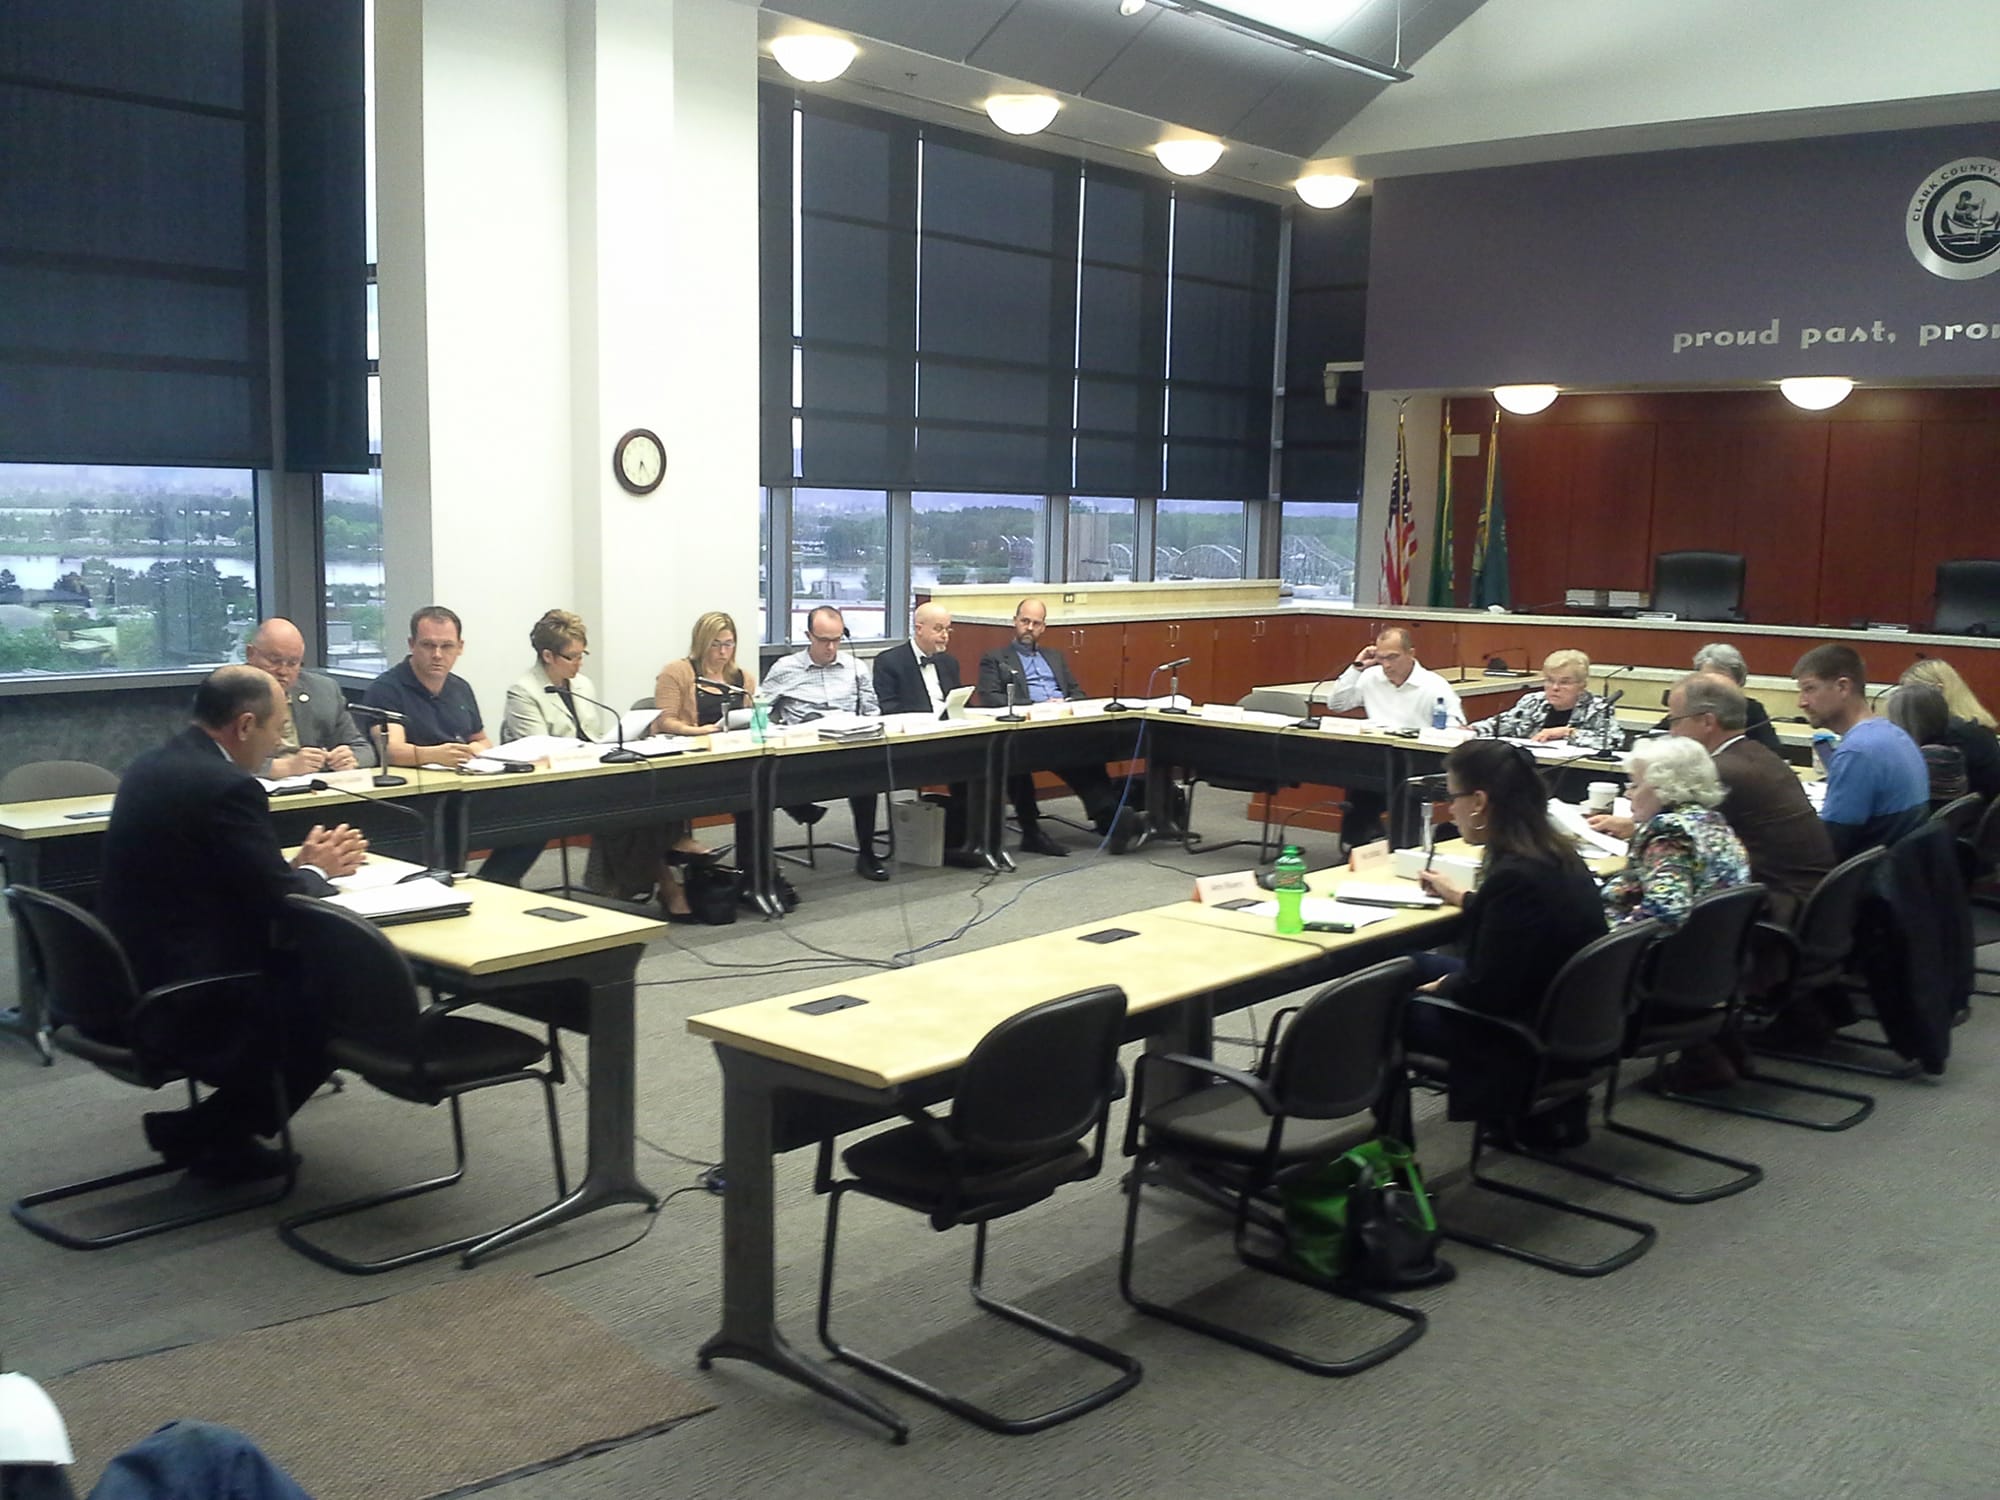 Clark County Auditor Greg Kimsey provides feedback to the Clark County Board of Freeholders at their April 22 meeting.